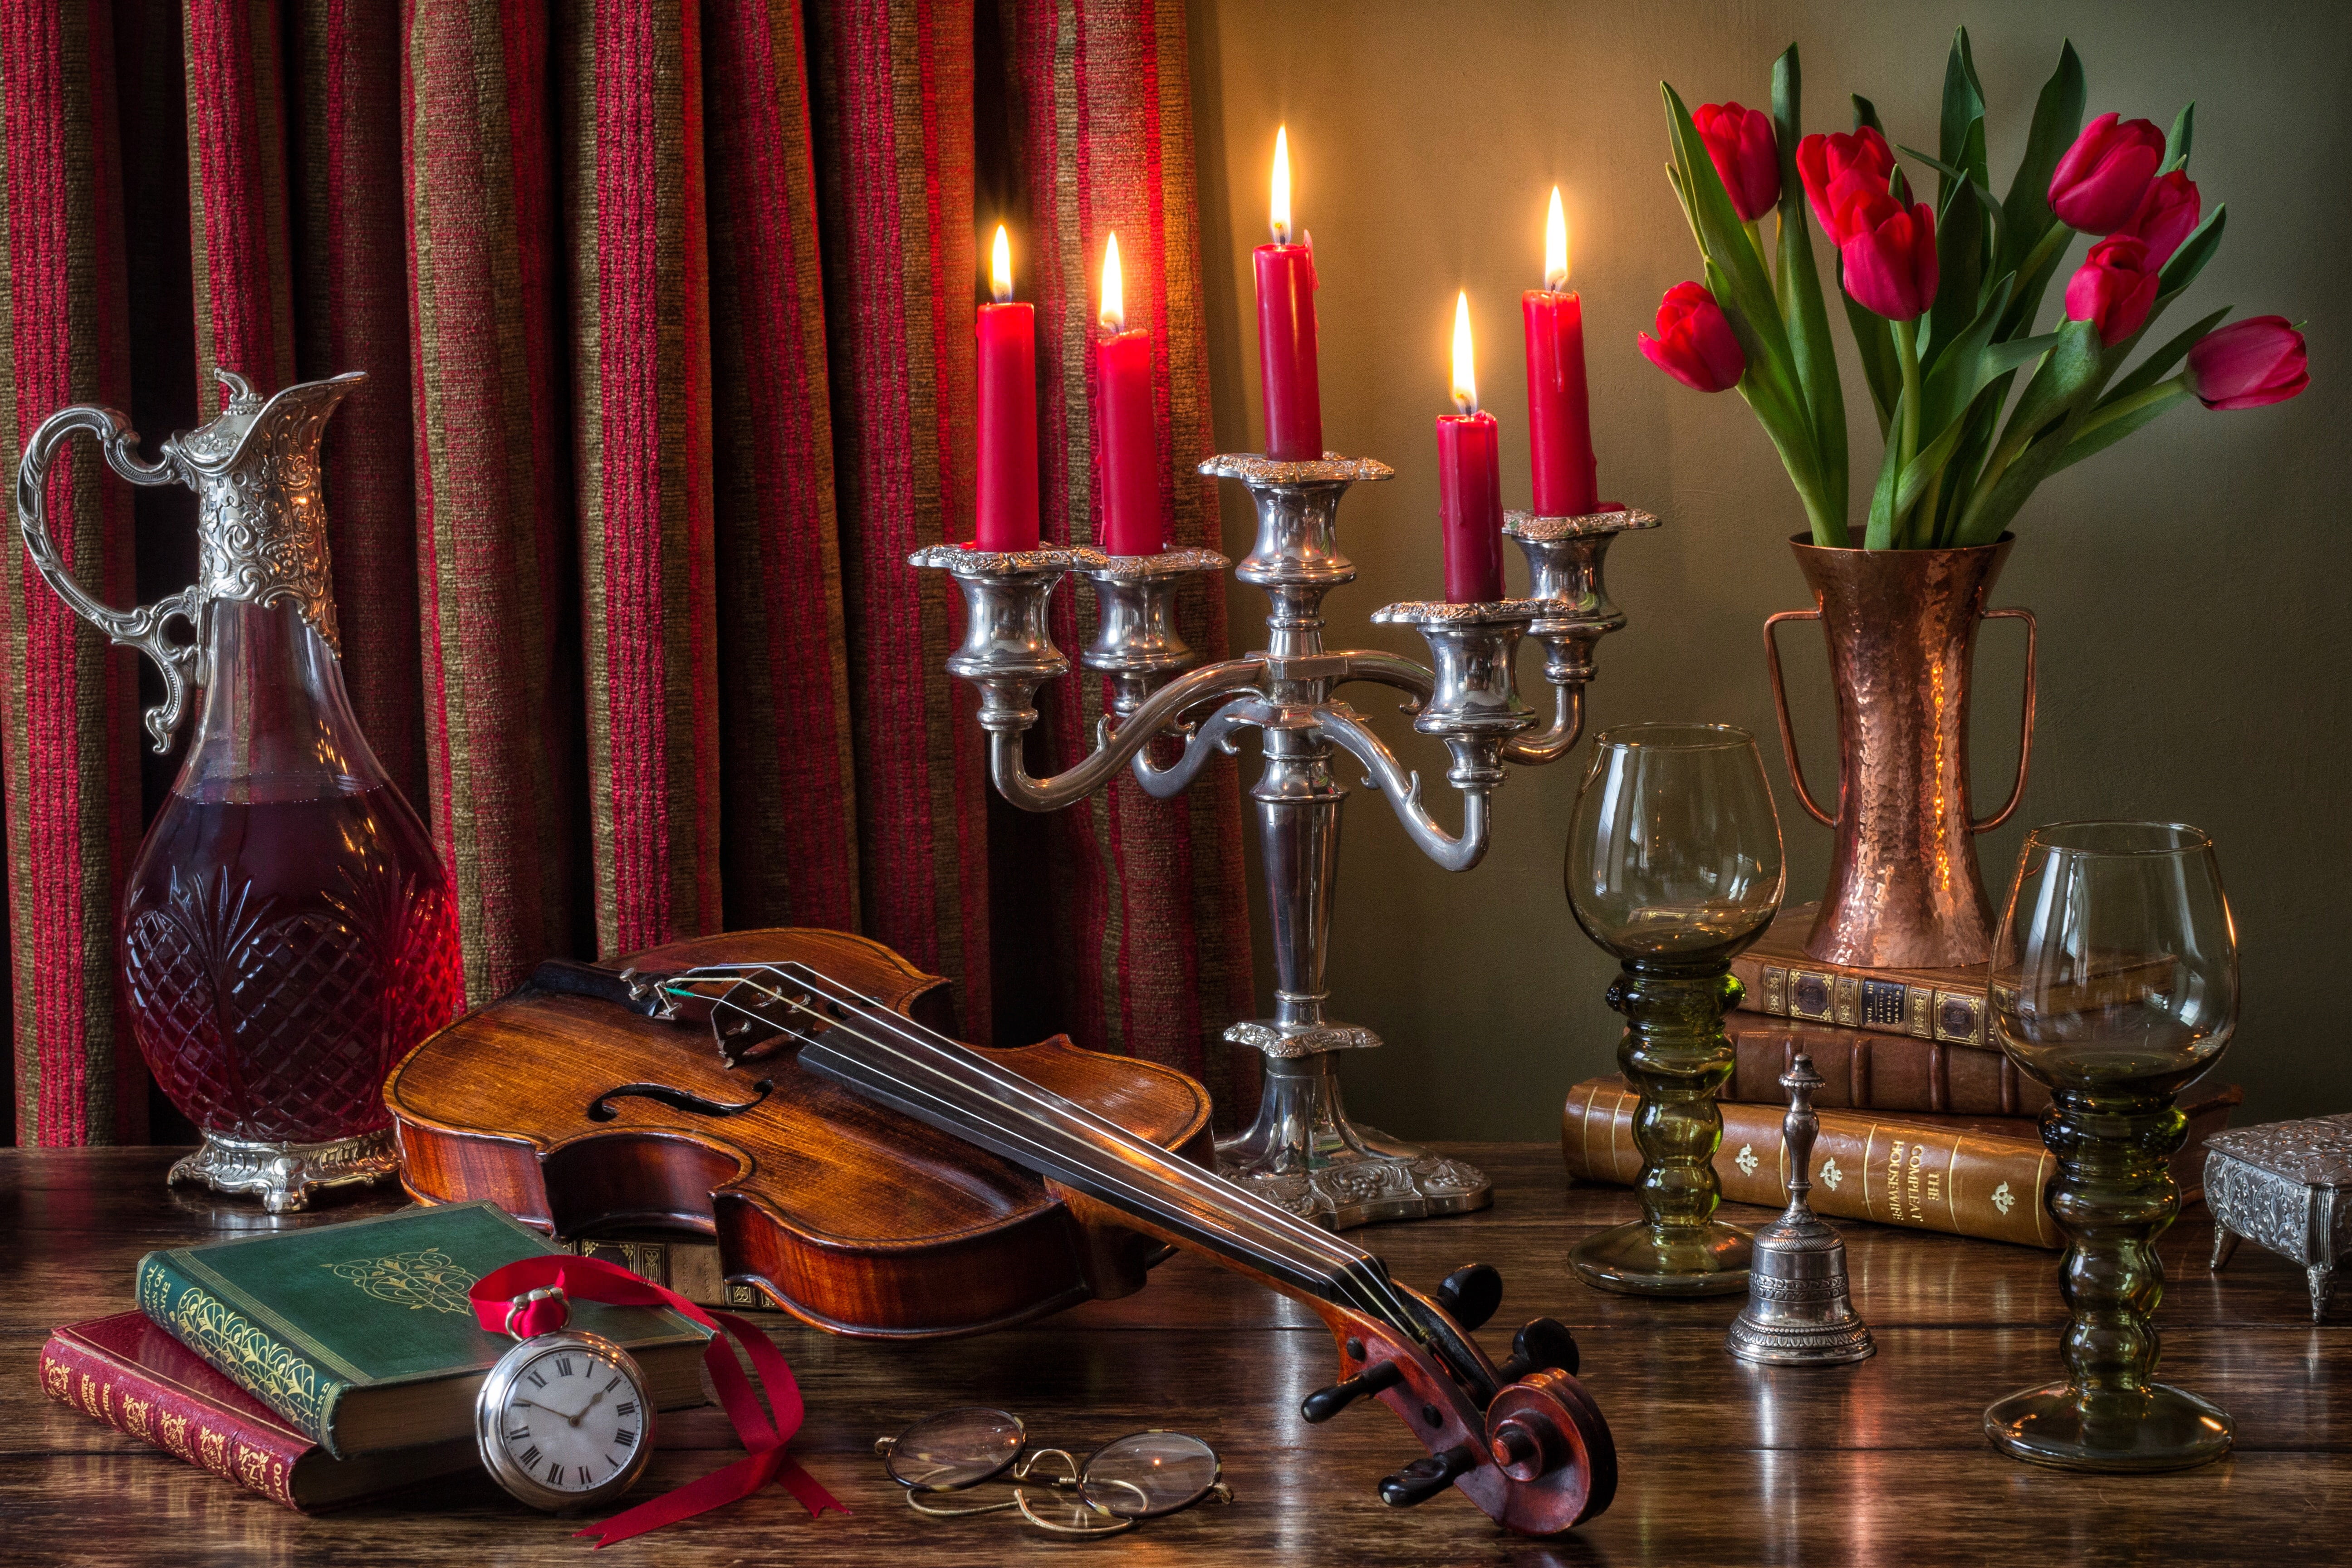 flowers, style, wine, violin, watch, books, candles, glasses